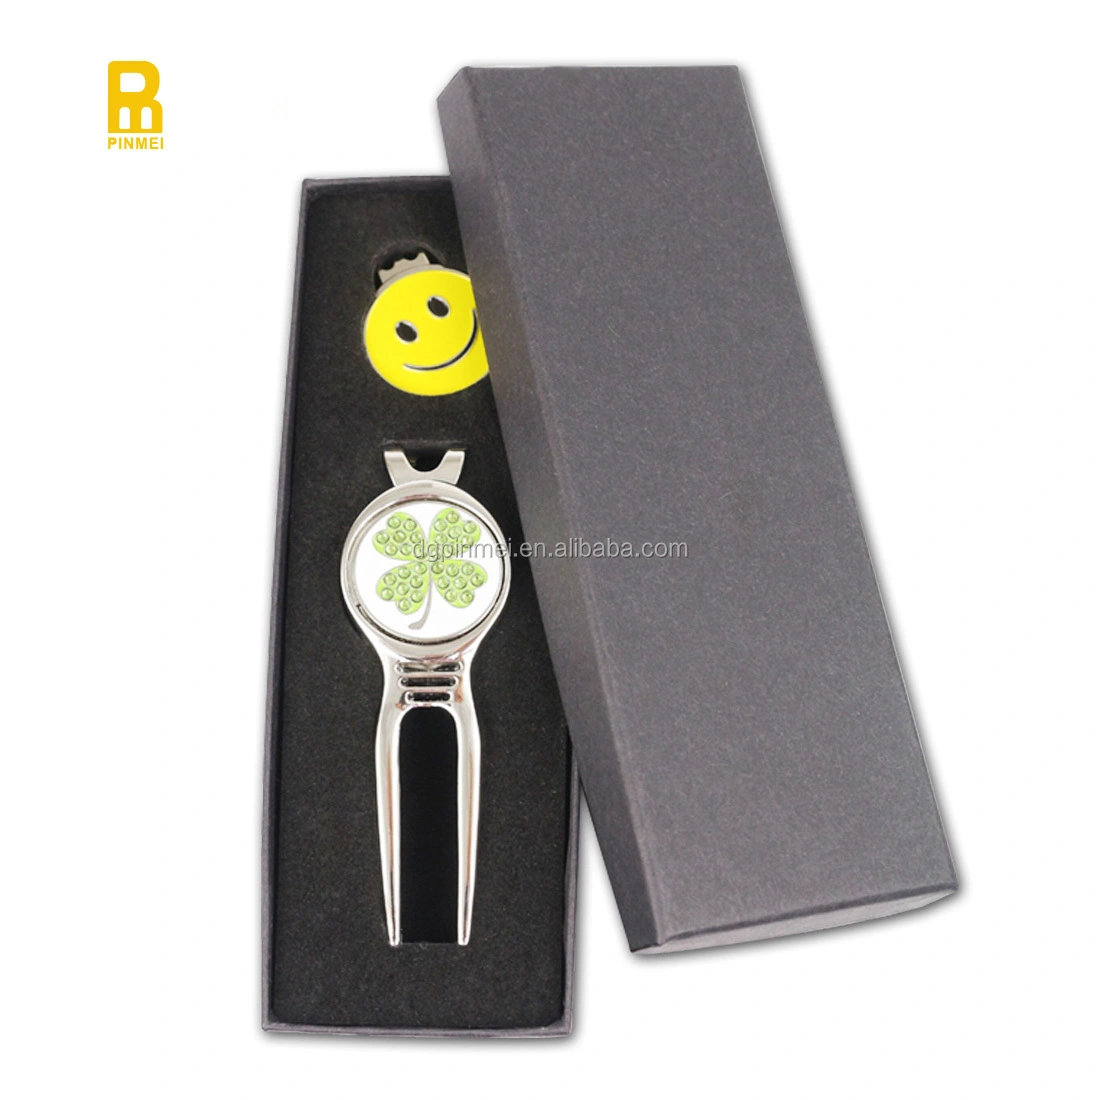 Magnetic golf divot tools/pitch forks and custom LOGO ball markers with packing hat clips